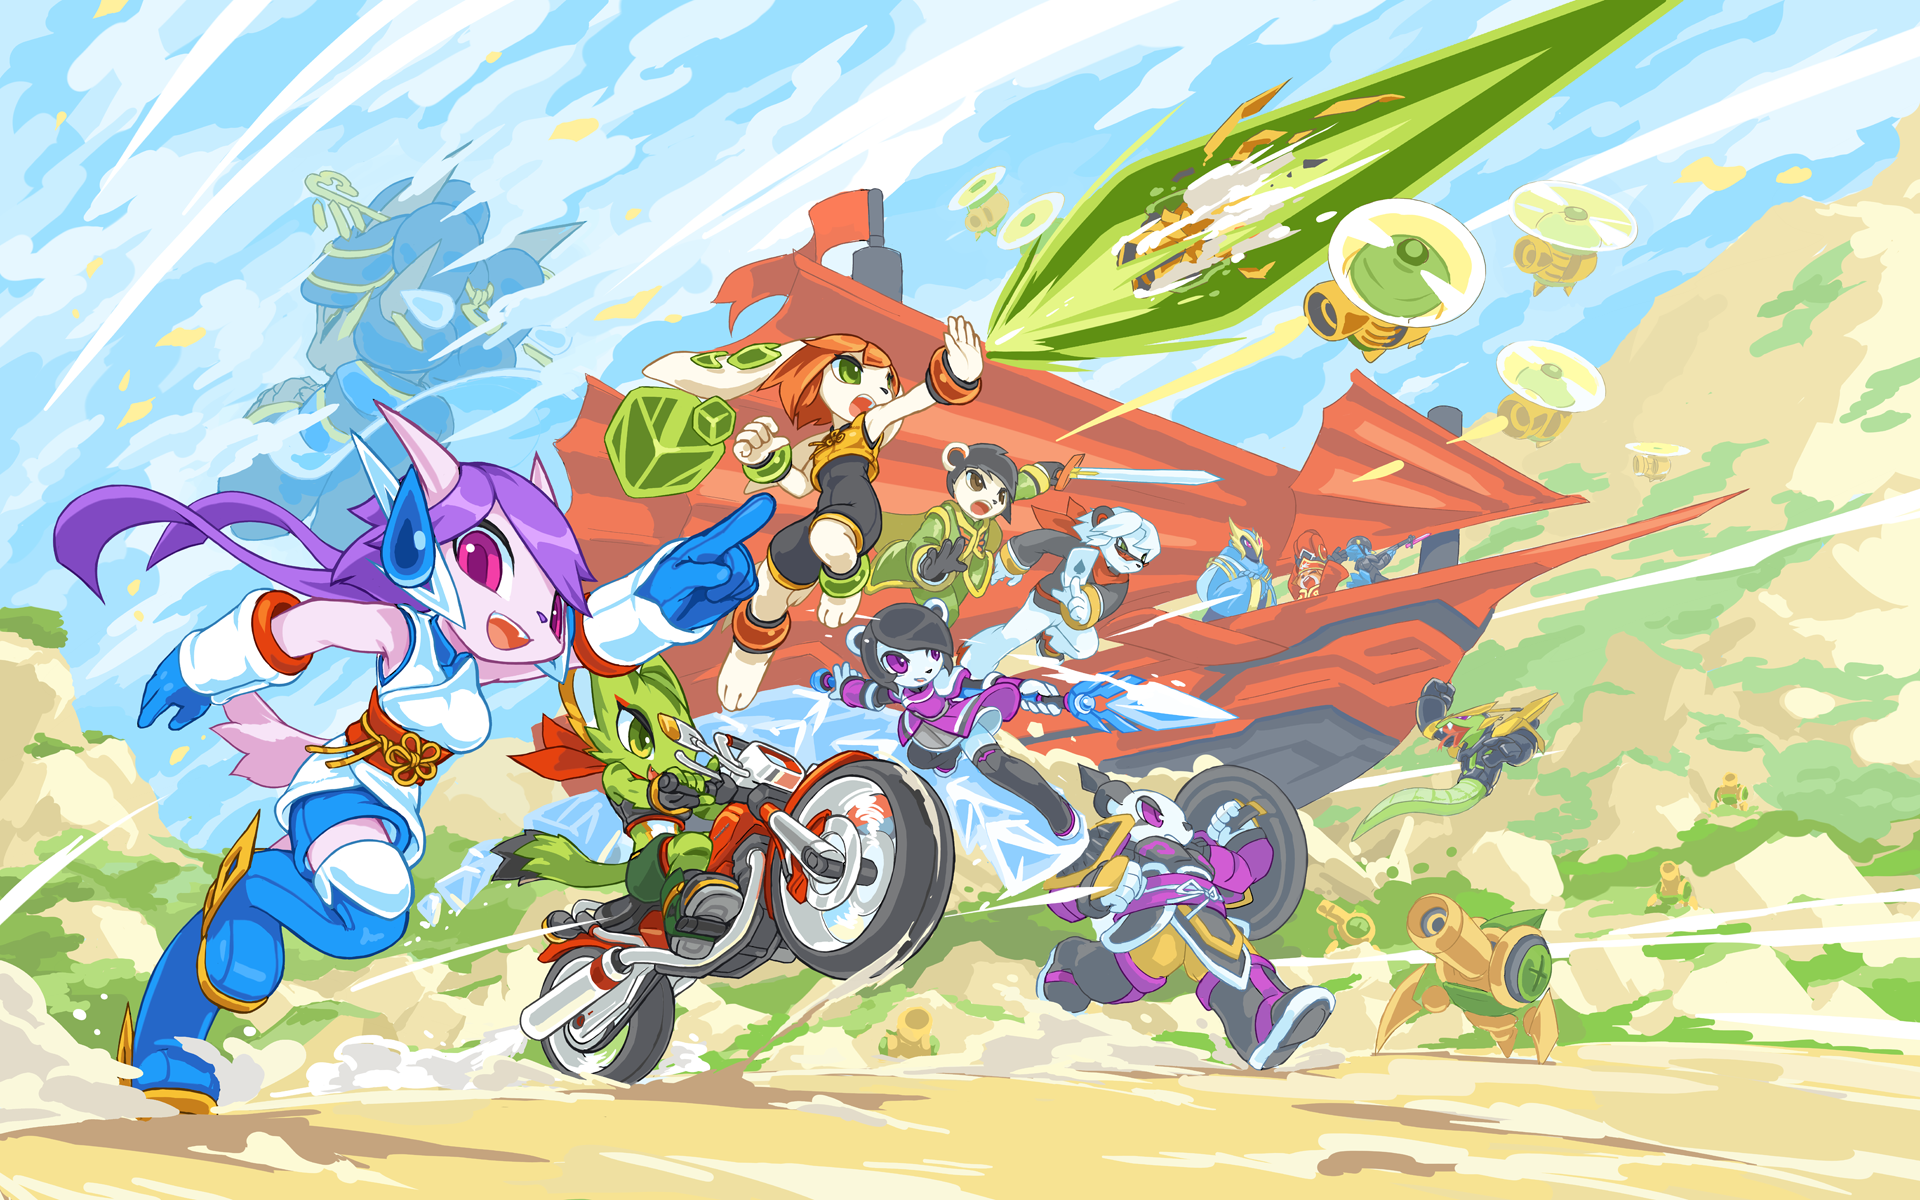 download freedom planet 2 ps4